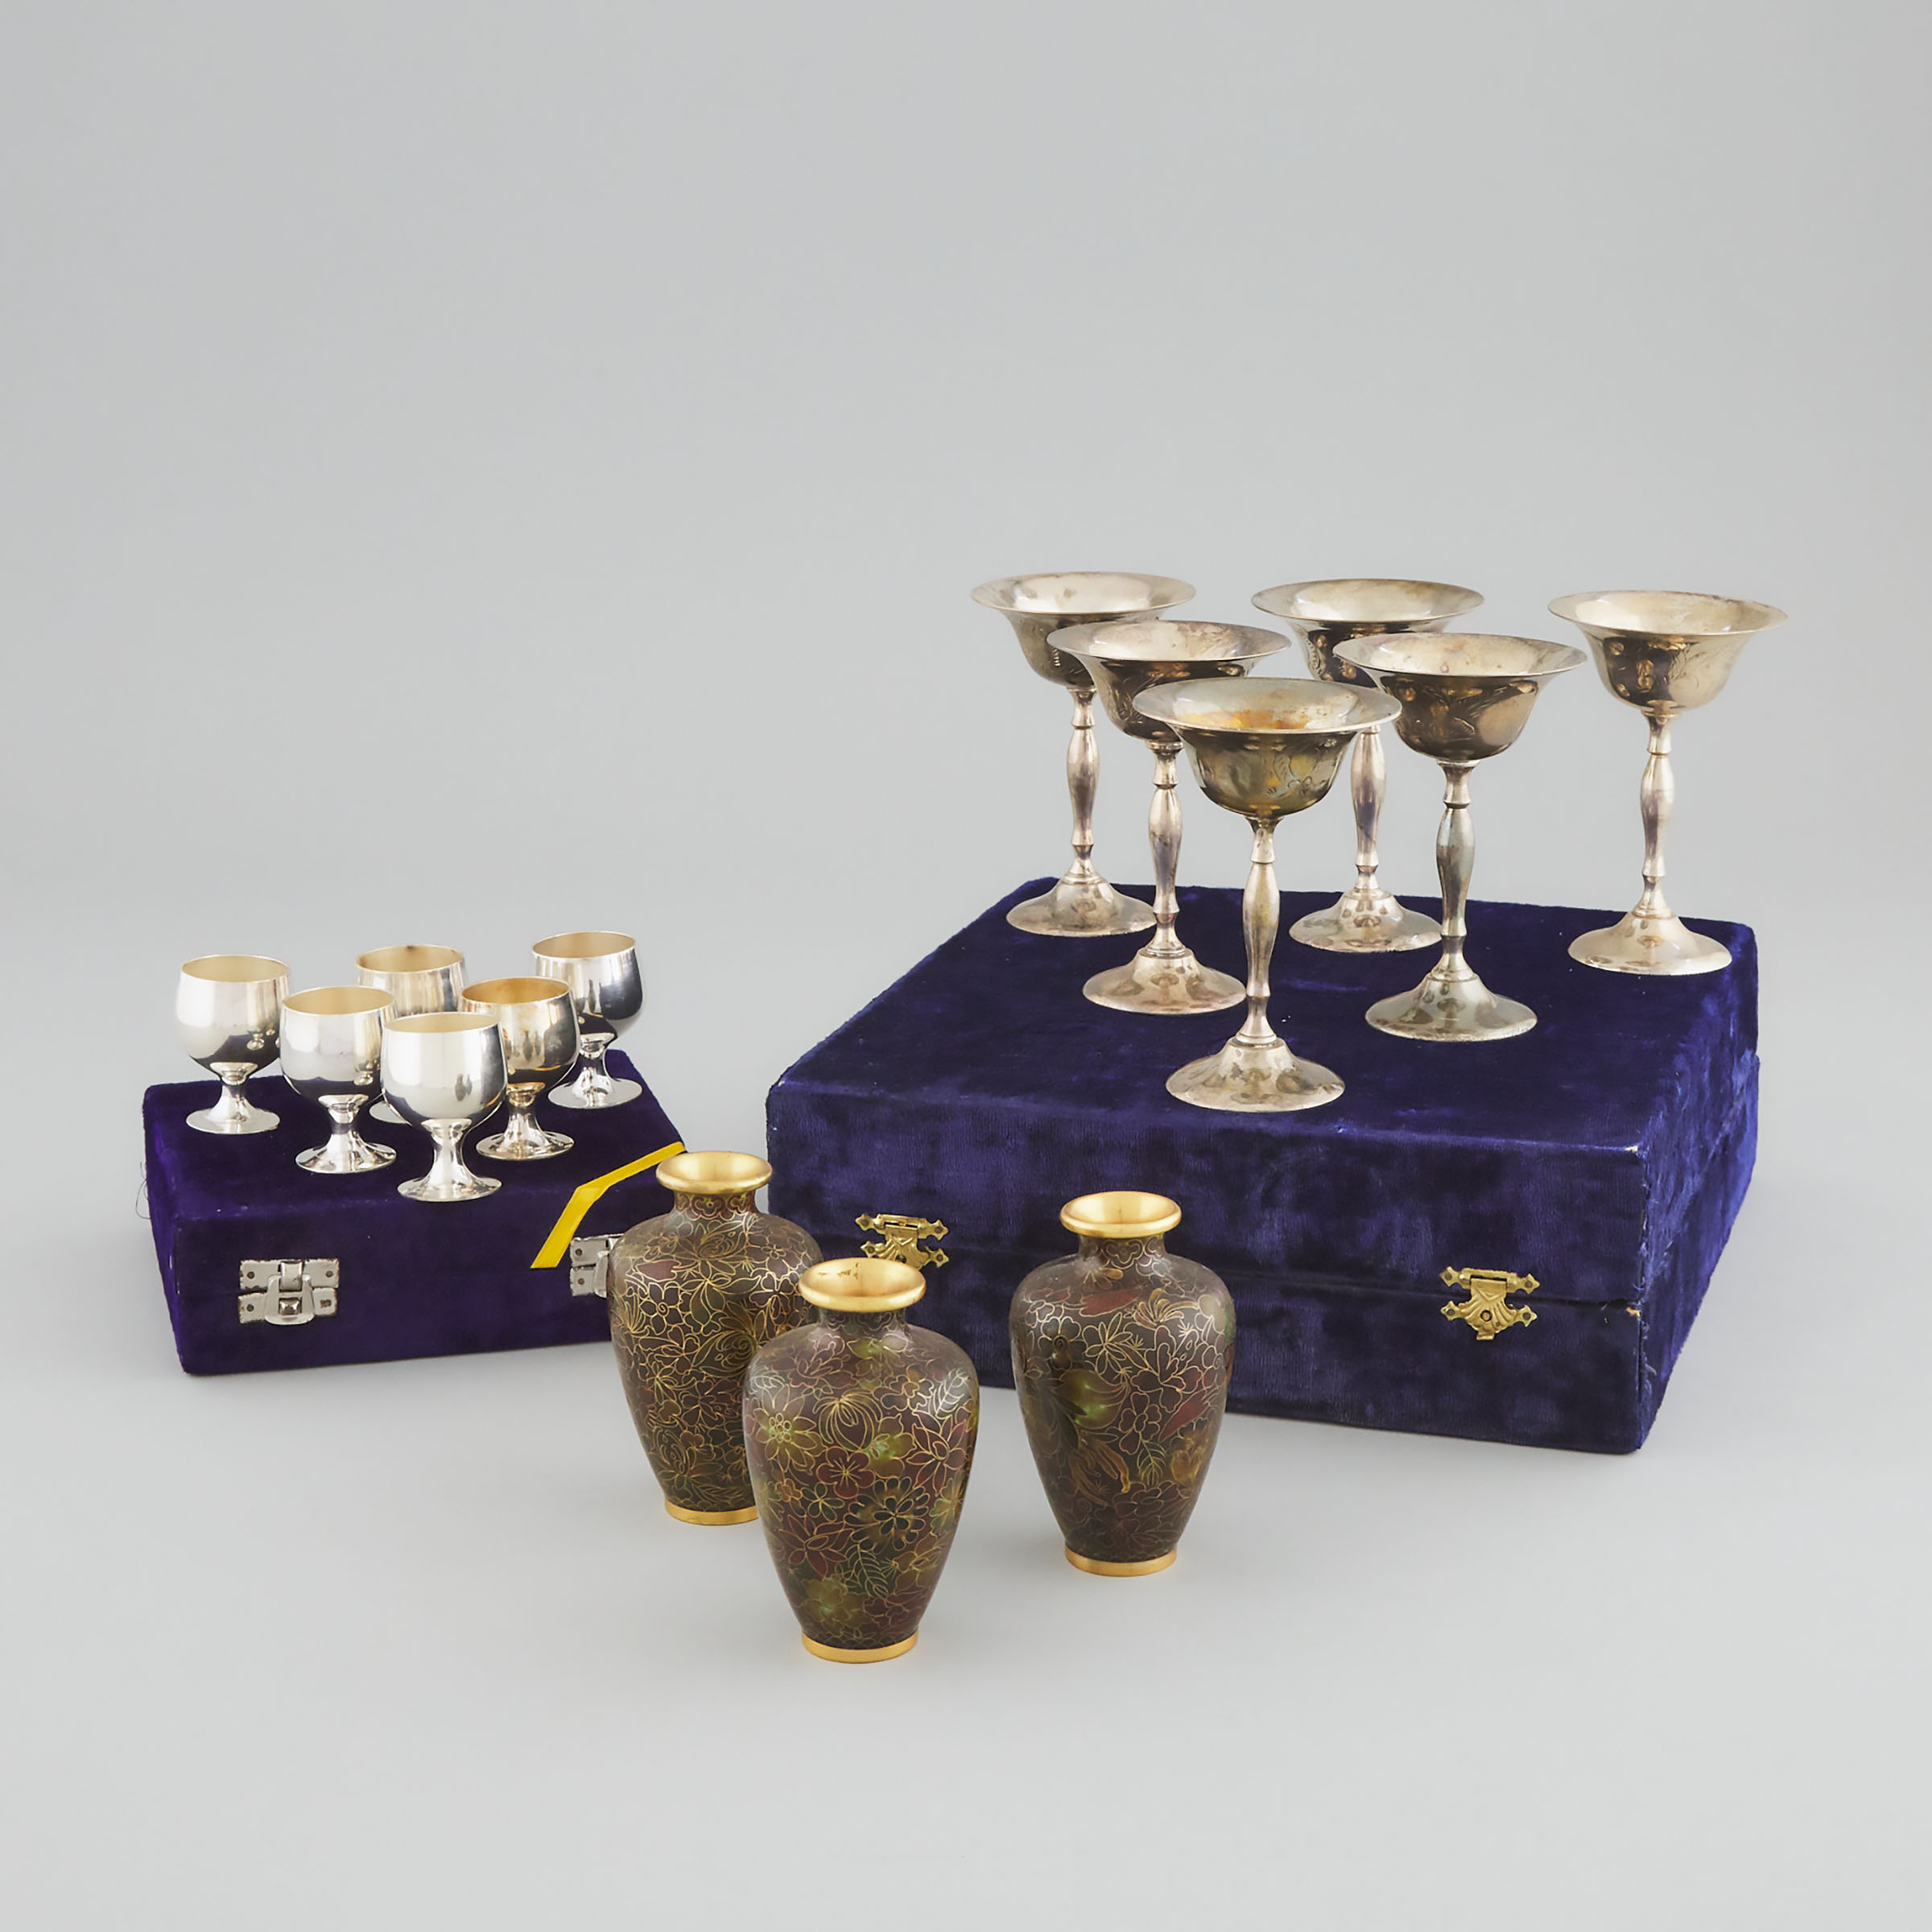 A Group of Three Miniature Cloisonné Vases, Together With Two Sets of Six Chinese Silver-Plated Stem Cups, Mid 20th Century